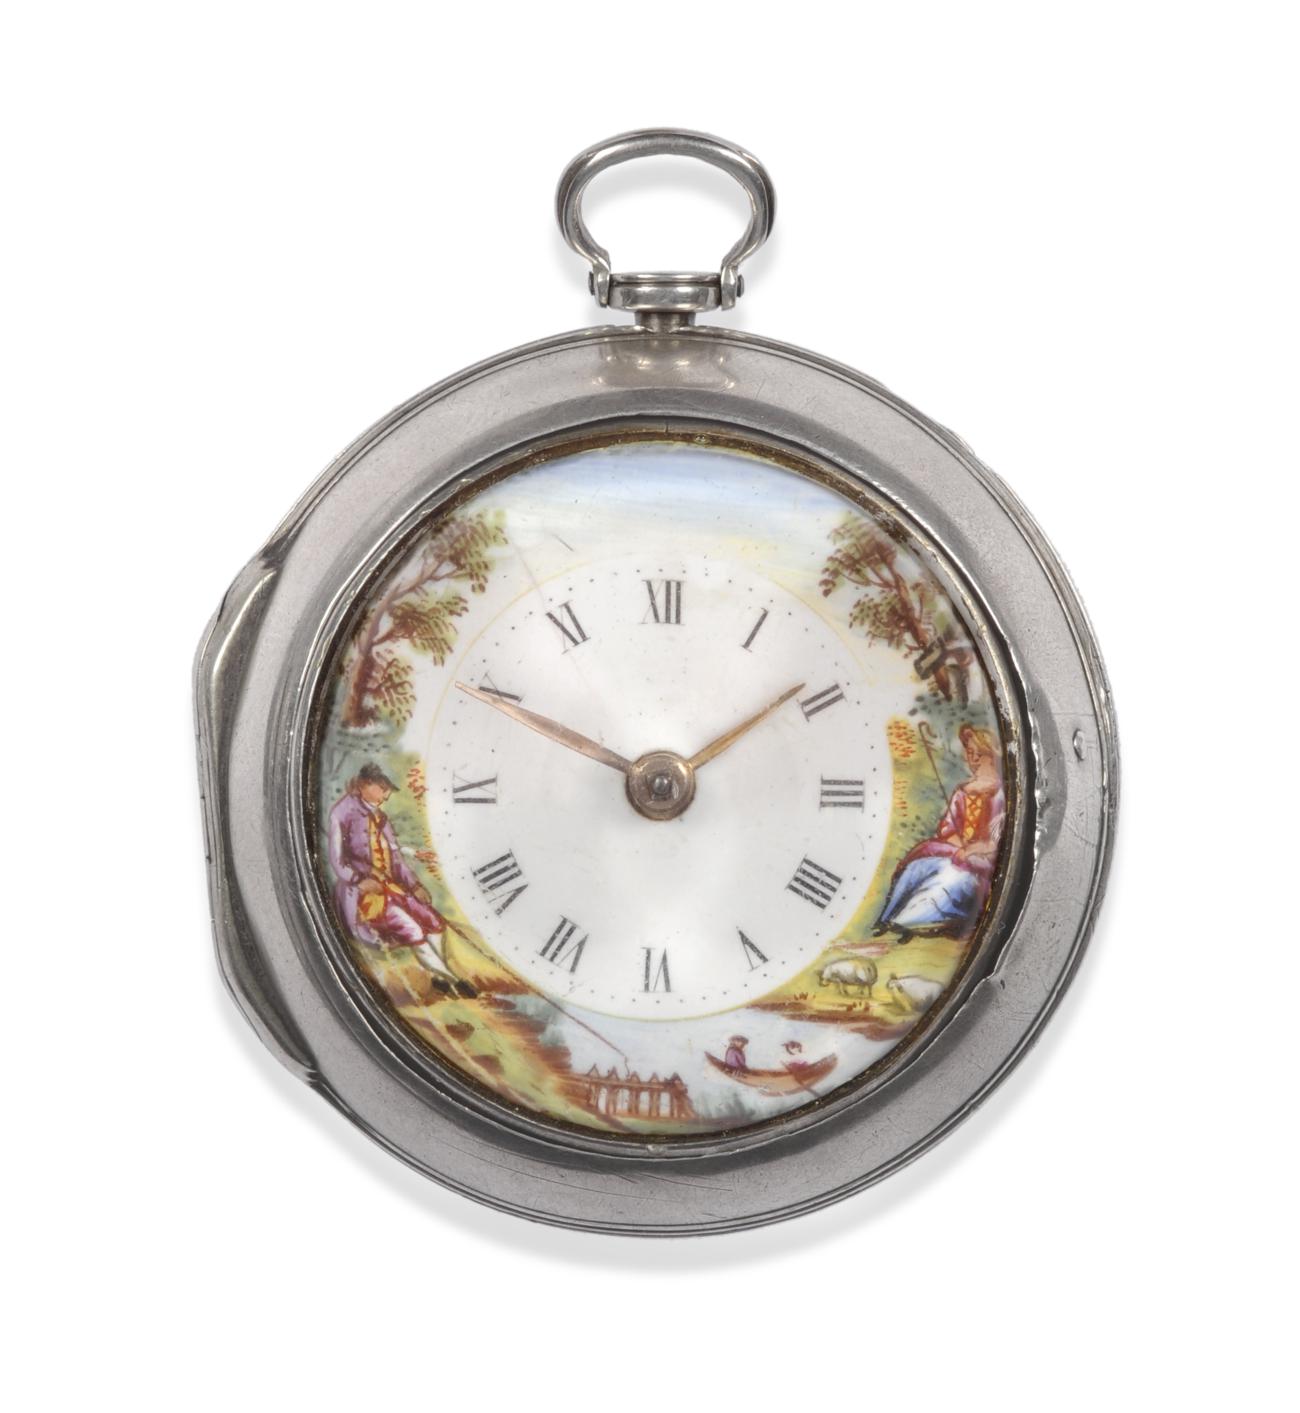 A Silver Pair Cased Verge Pocket Watch, signed Smith, London, 1782, gilt fusee movement signed and